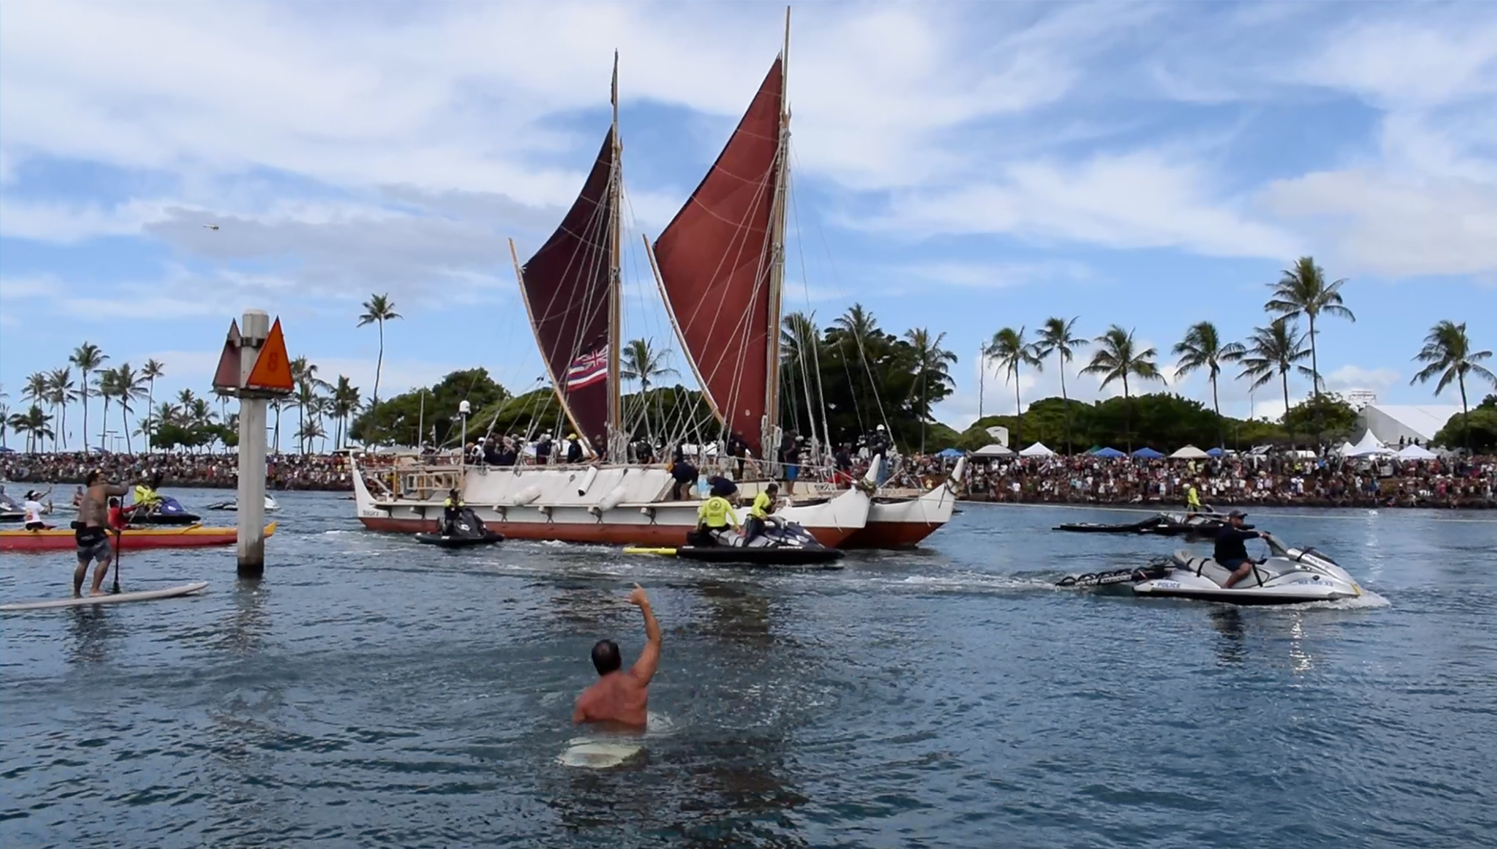 Hokulea in the ocean by Magic Island, Oahu returning from a voyage. Hundreds of spectators greet the canoe on the shore.